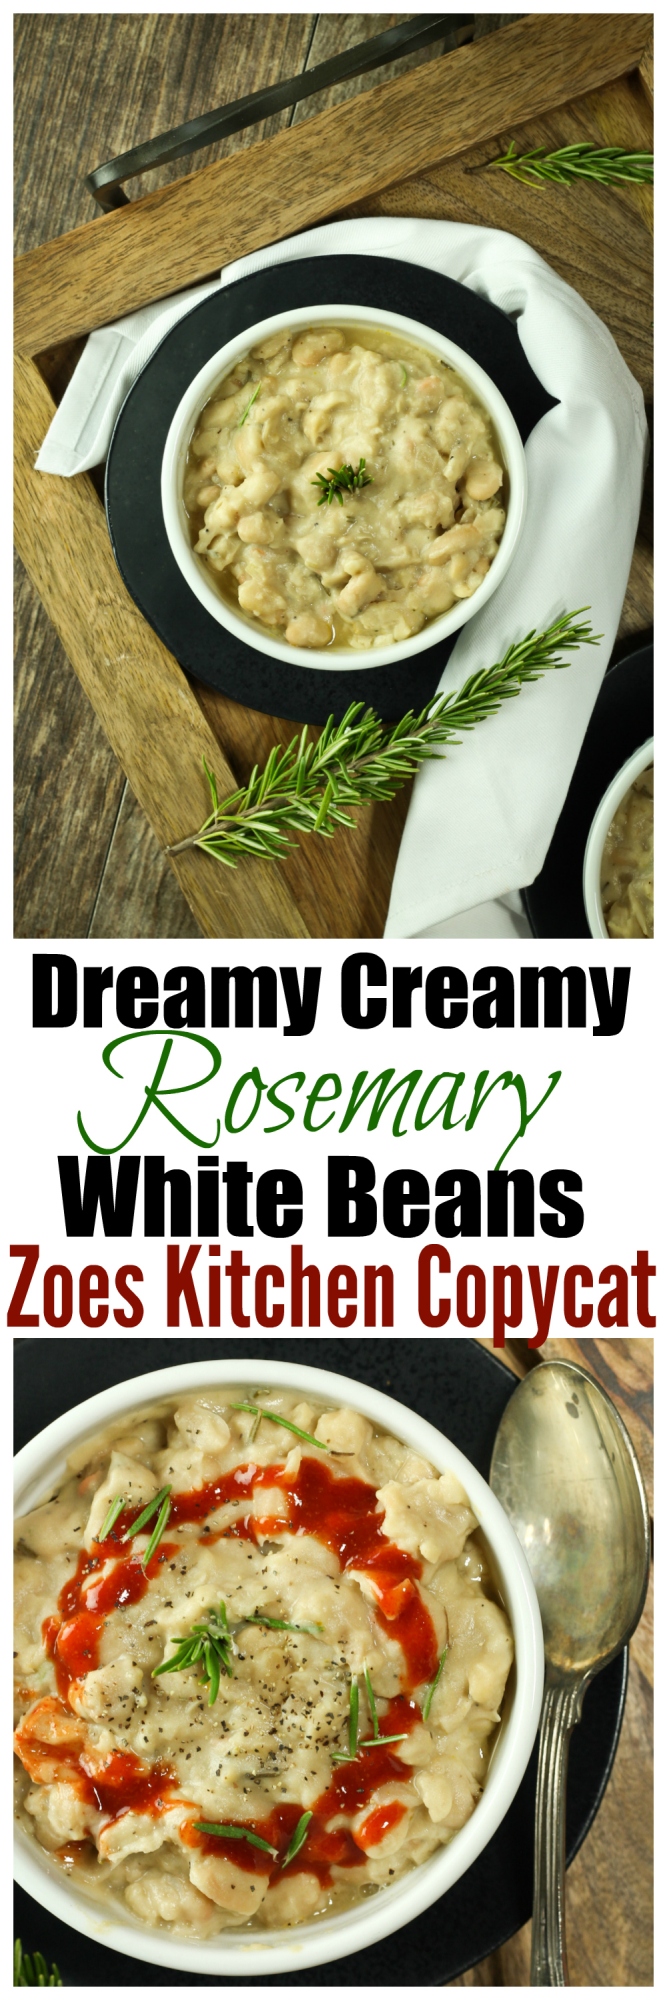 Rosemary White Beans Zoes Kitchen Copycat The Vegan 8